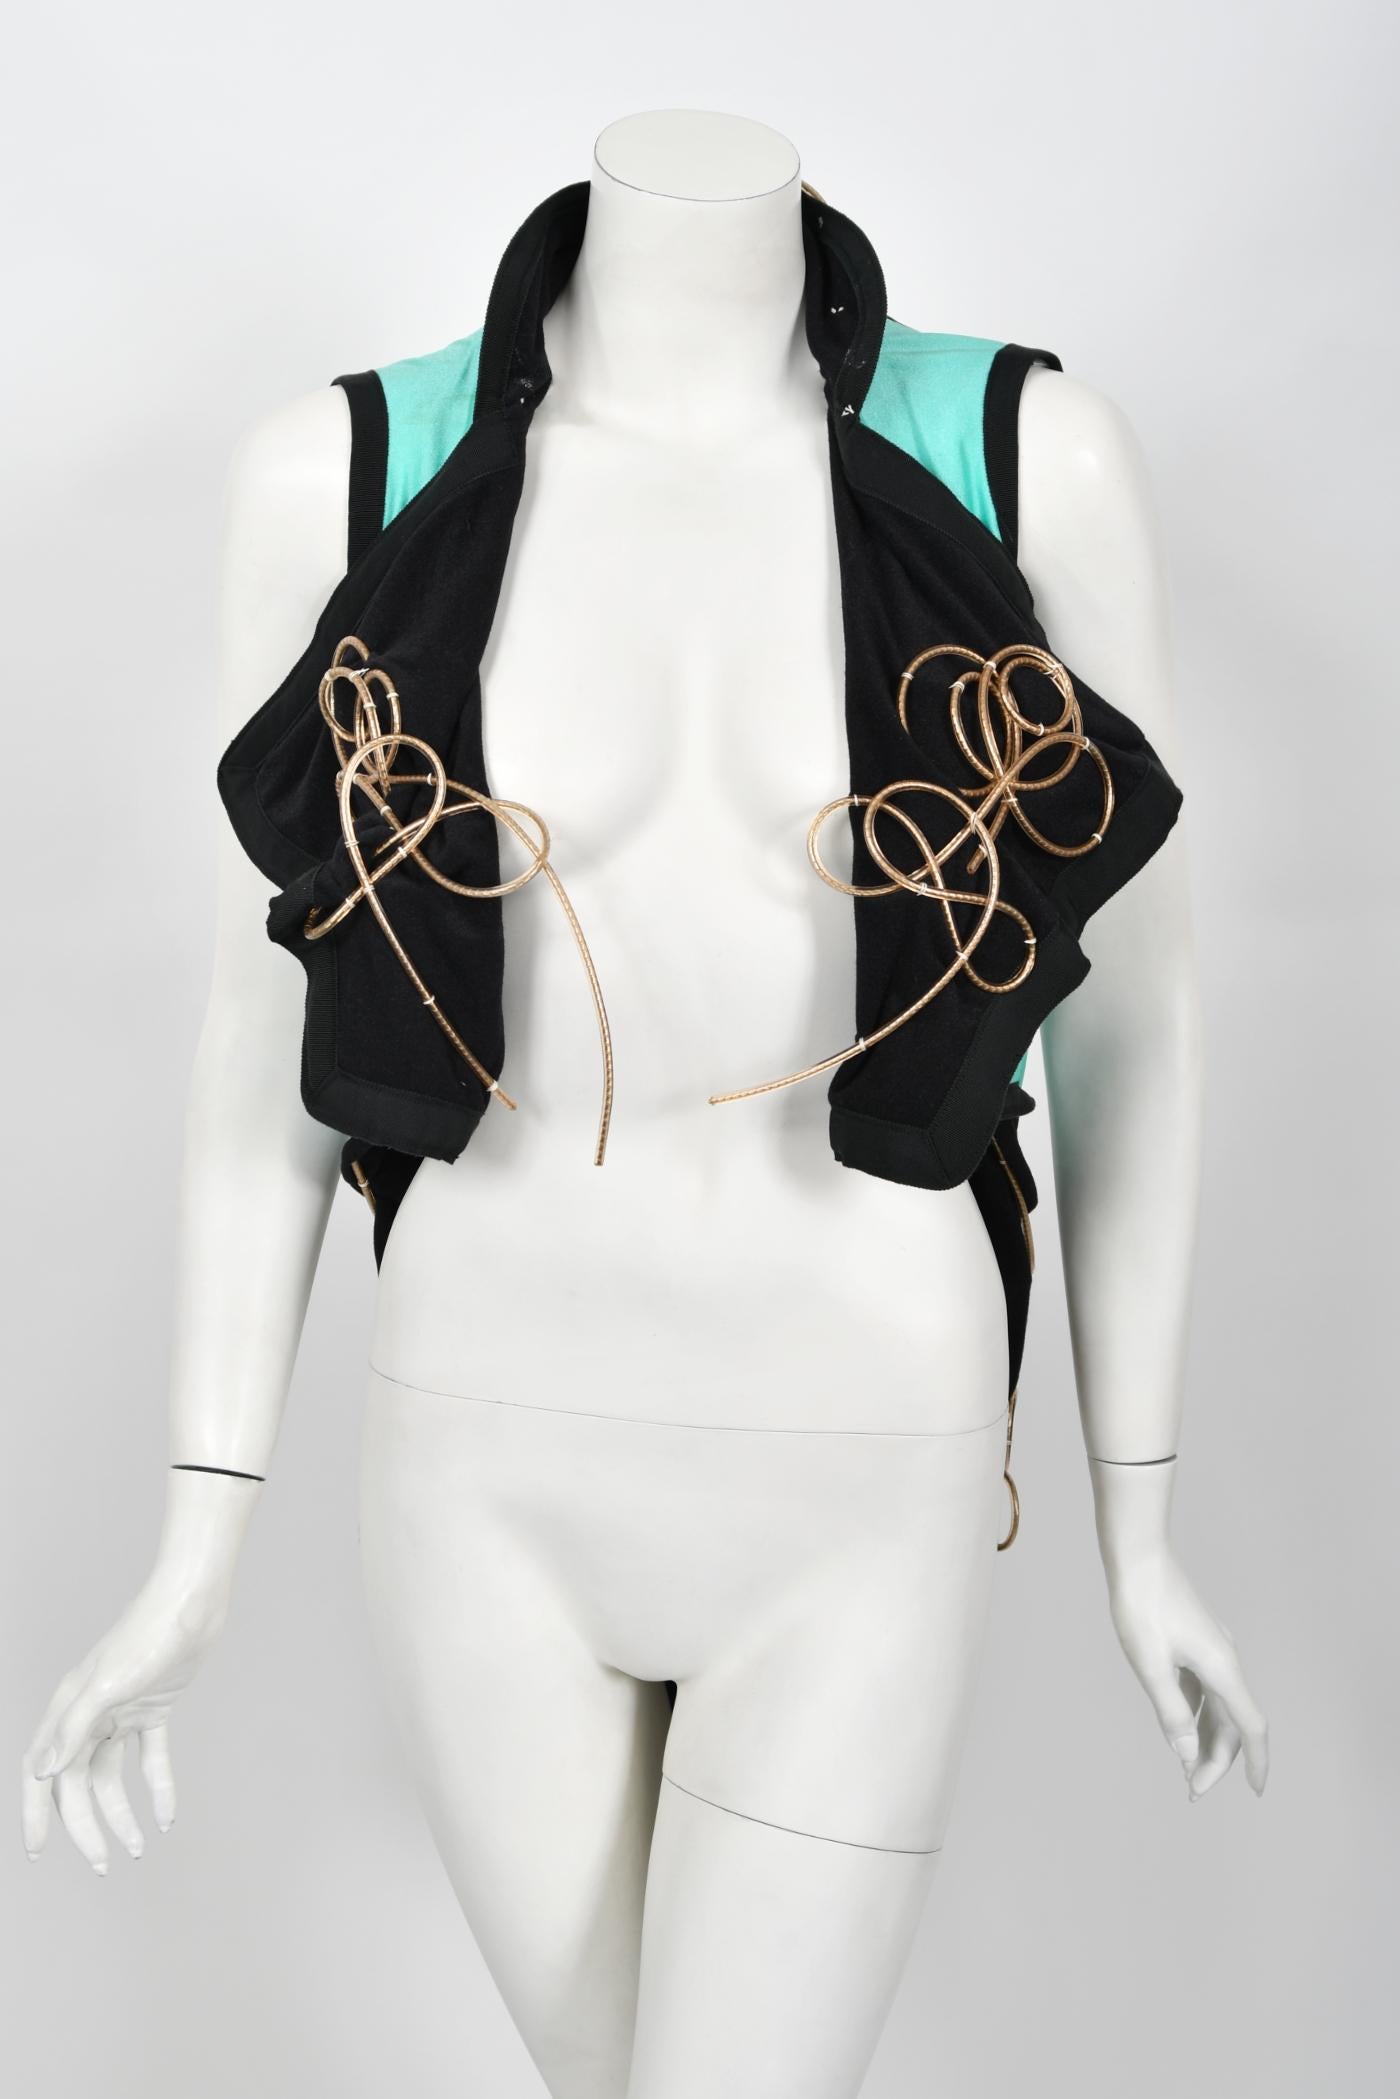 1991 John Galliano Documented Runway Black & Blue Military Inspired Cropped Vest 1